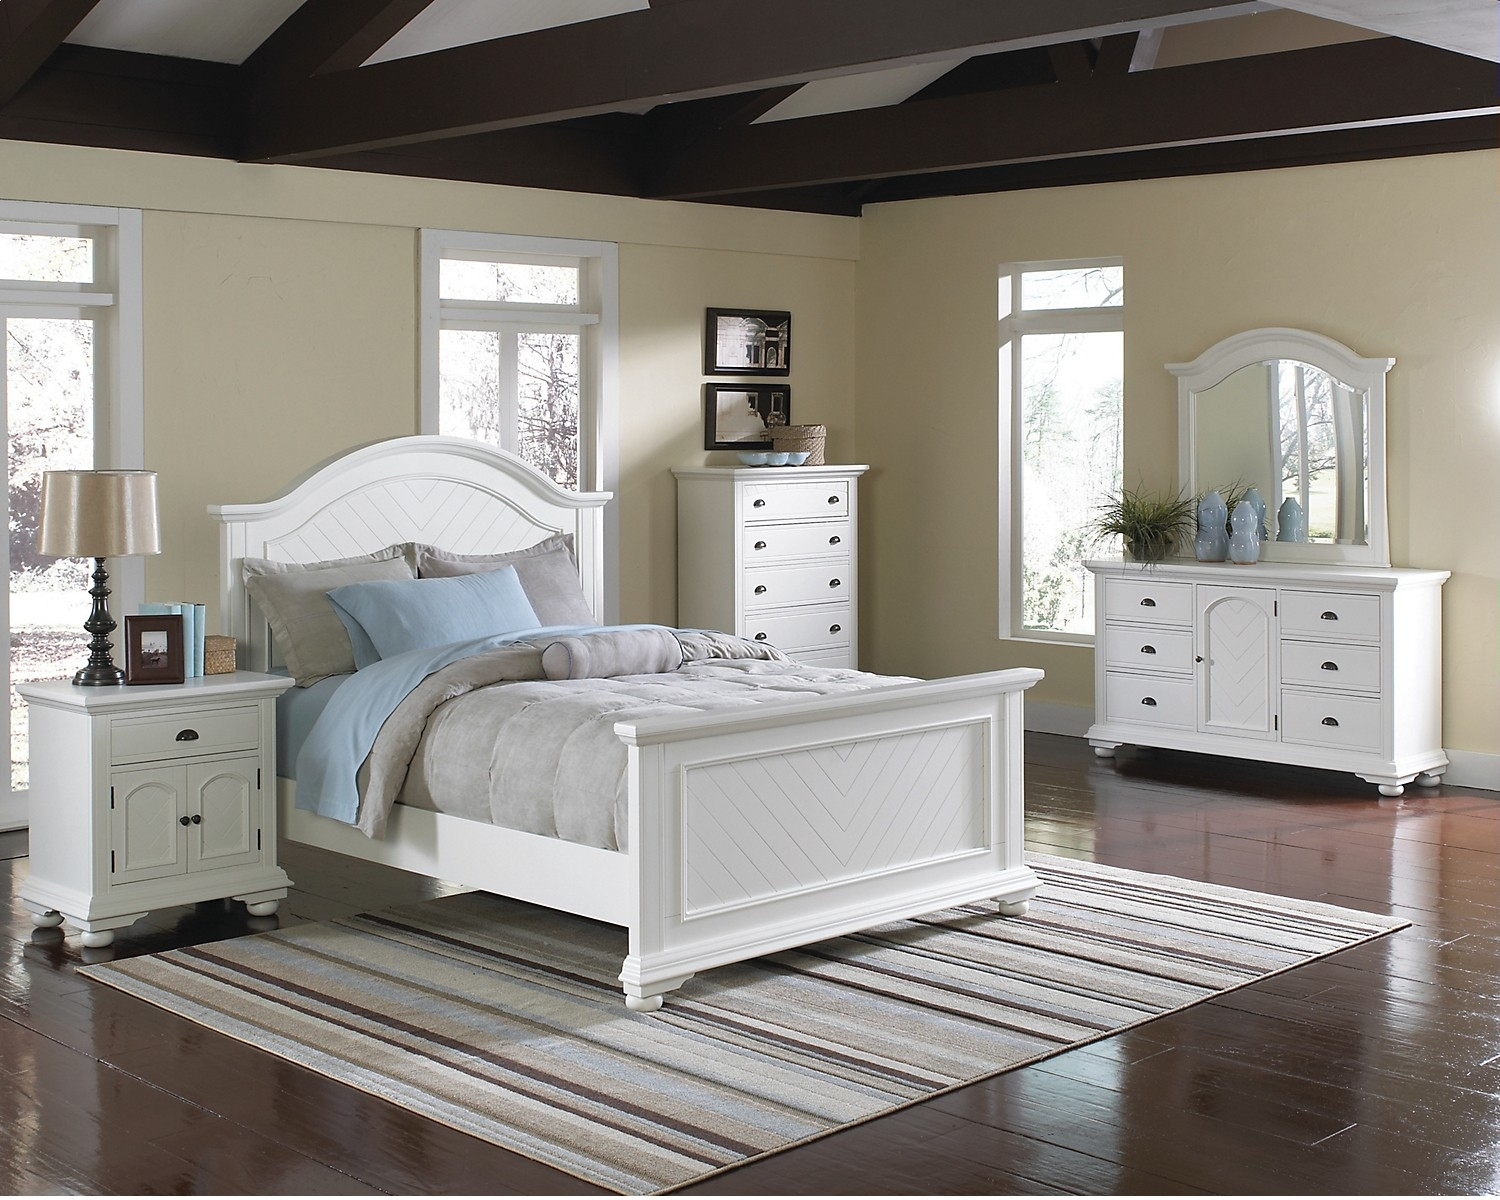 White Bedroom Set Offering Versatile Styles Innonpender pertaining to sizing 1500 X 1200